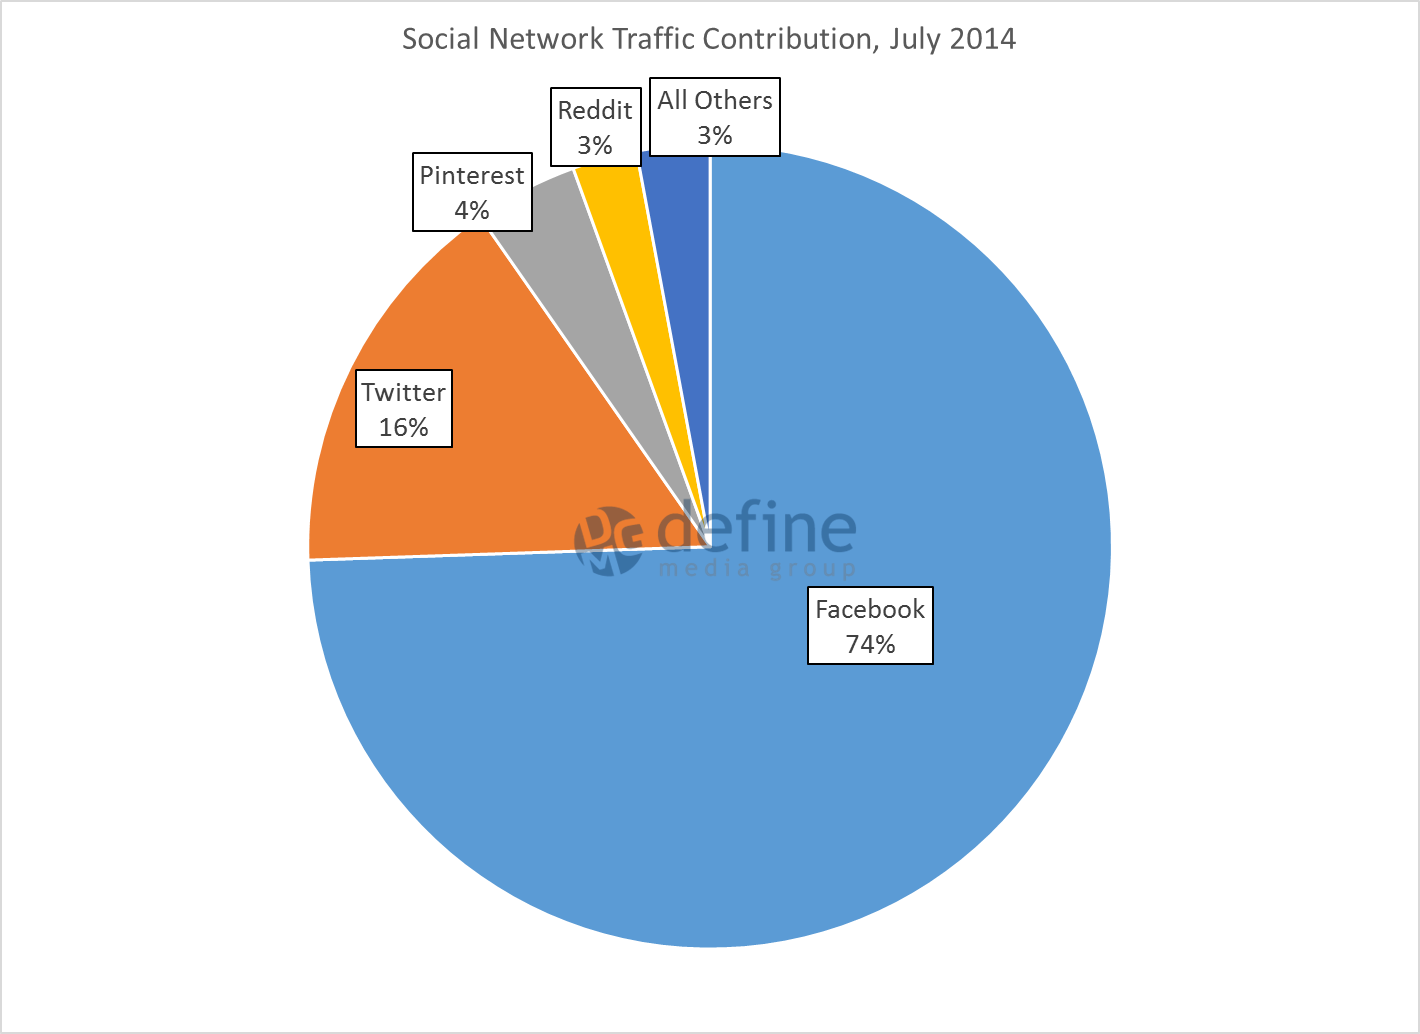 fb-7-social-network-contribution-july-14